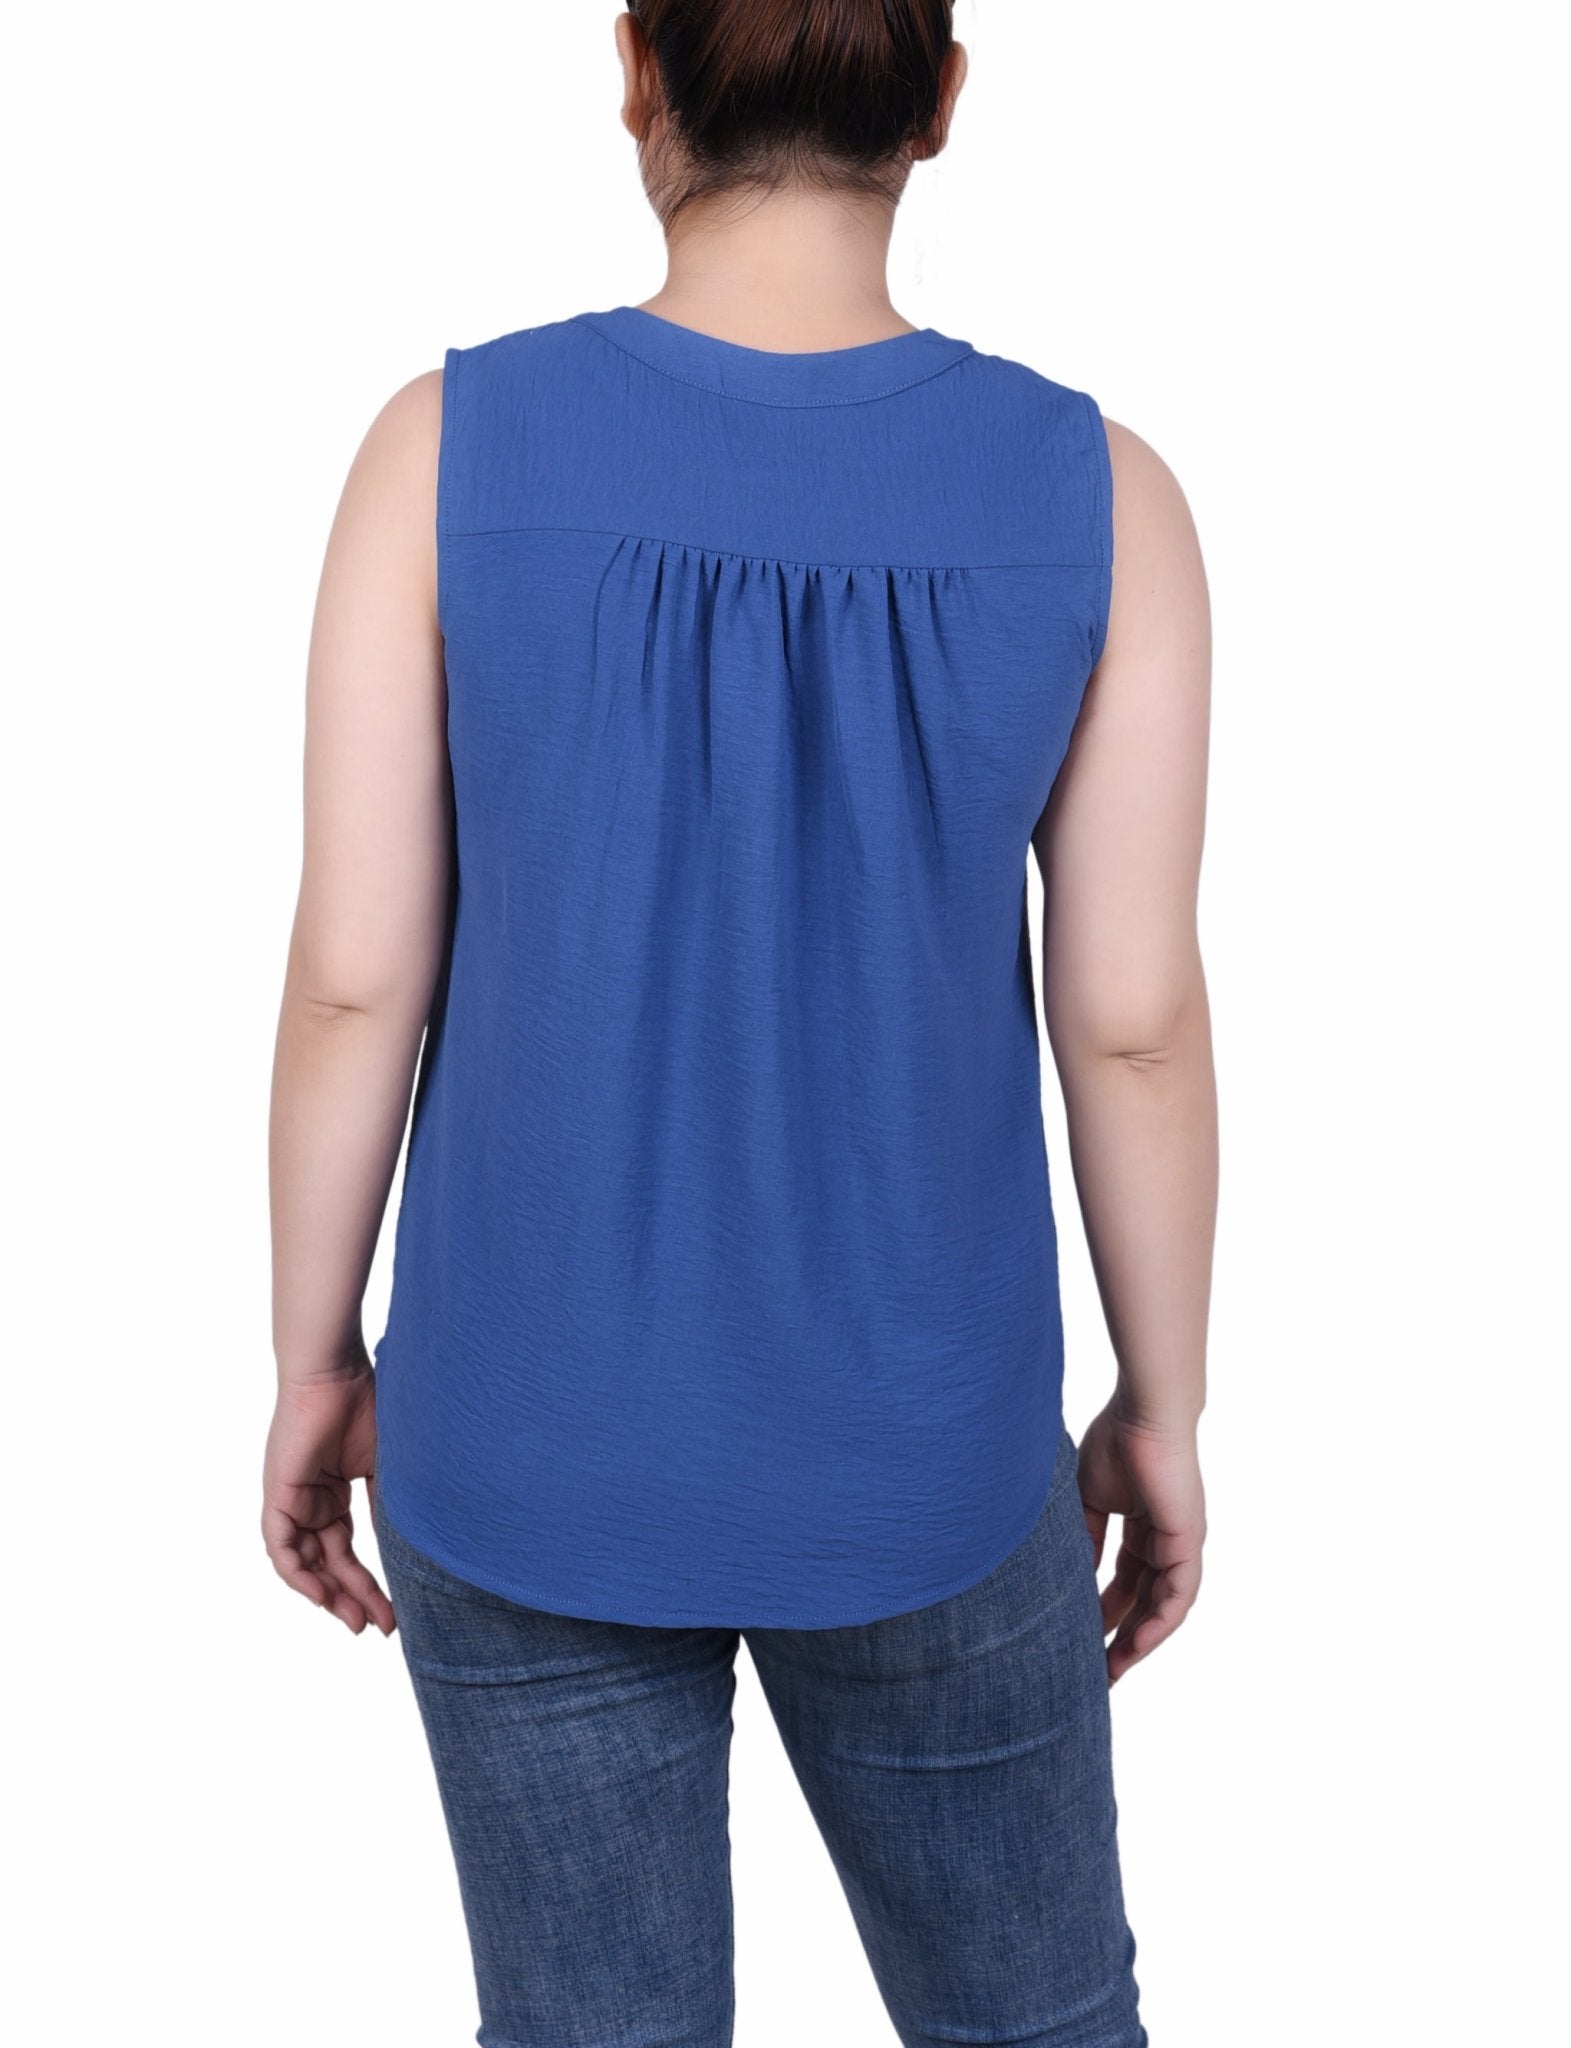 NY Collection Sleeveless Air Flow Blouse - Petite - DressbarnShirts & Blouses